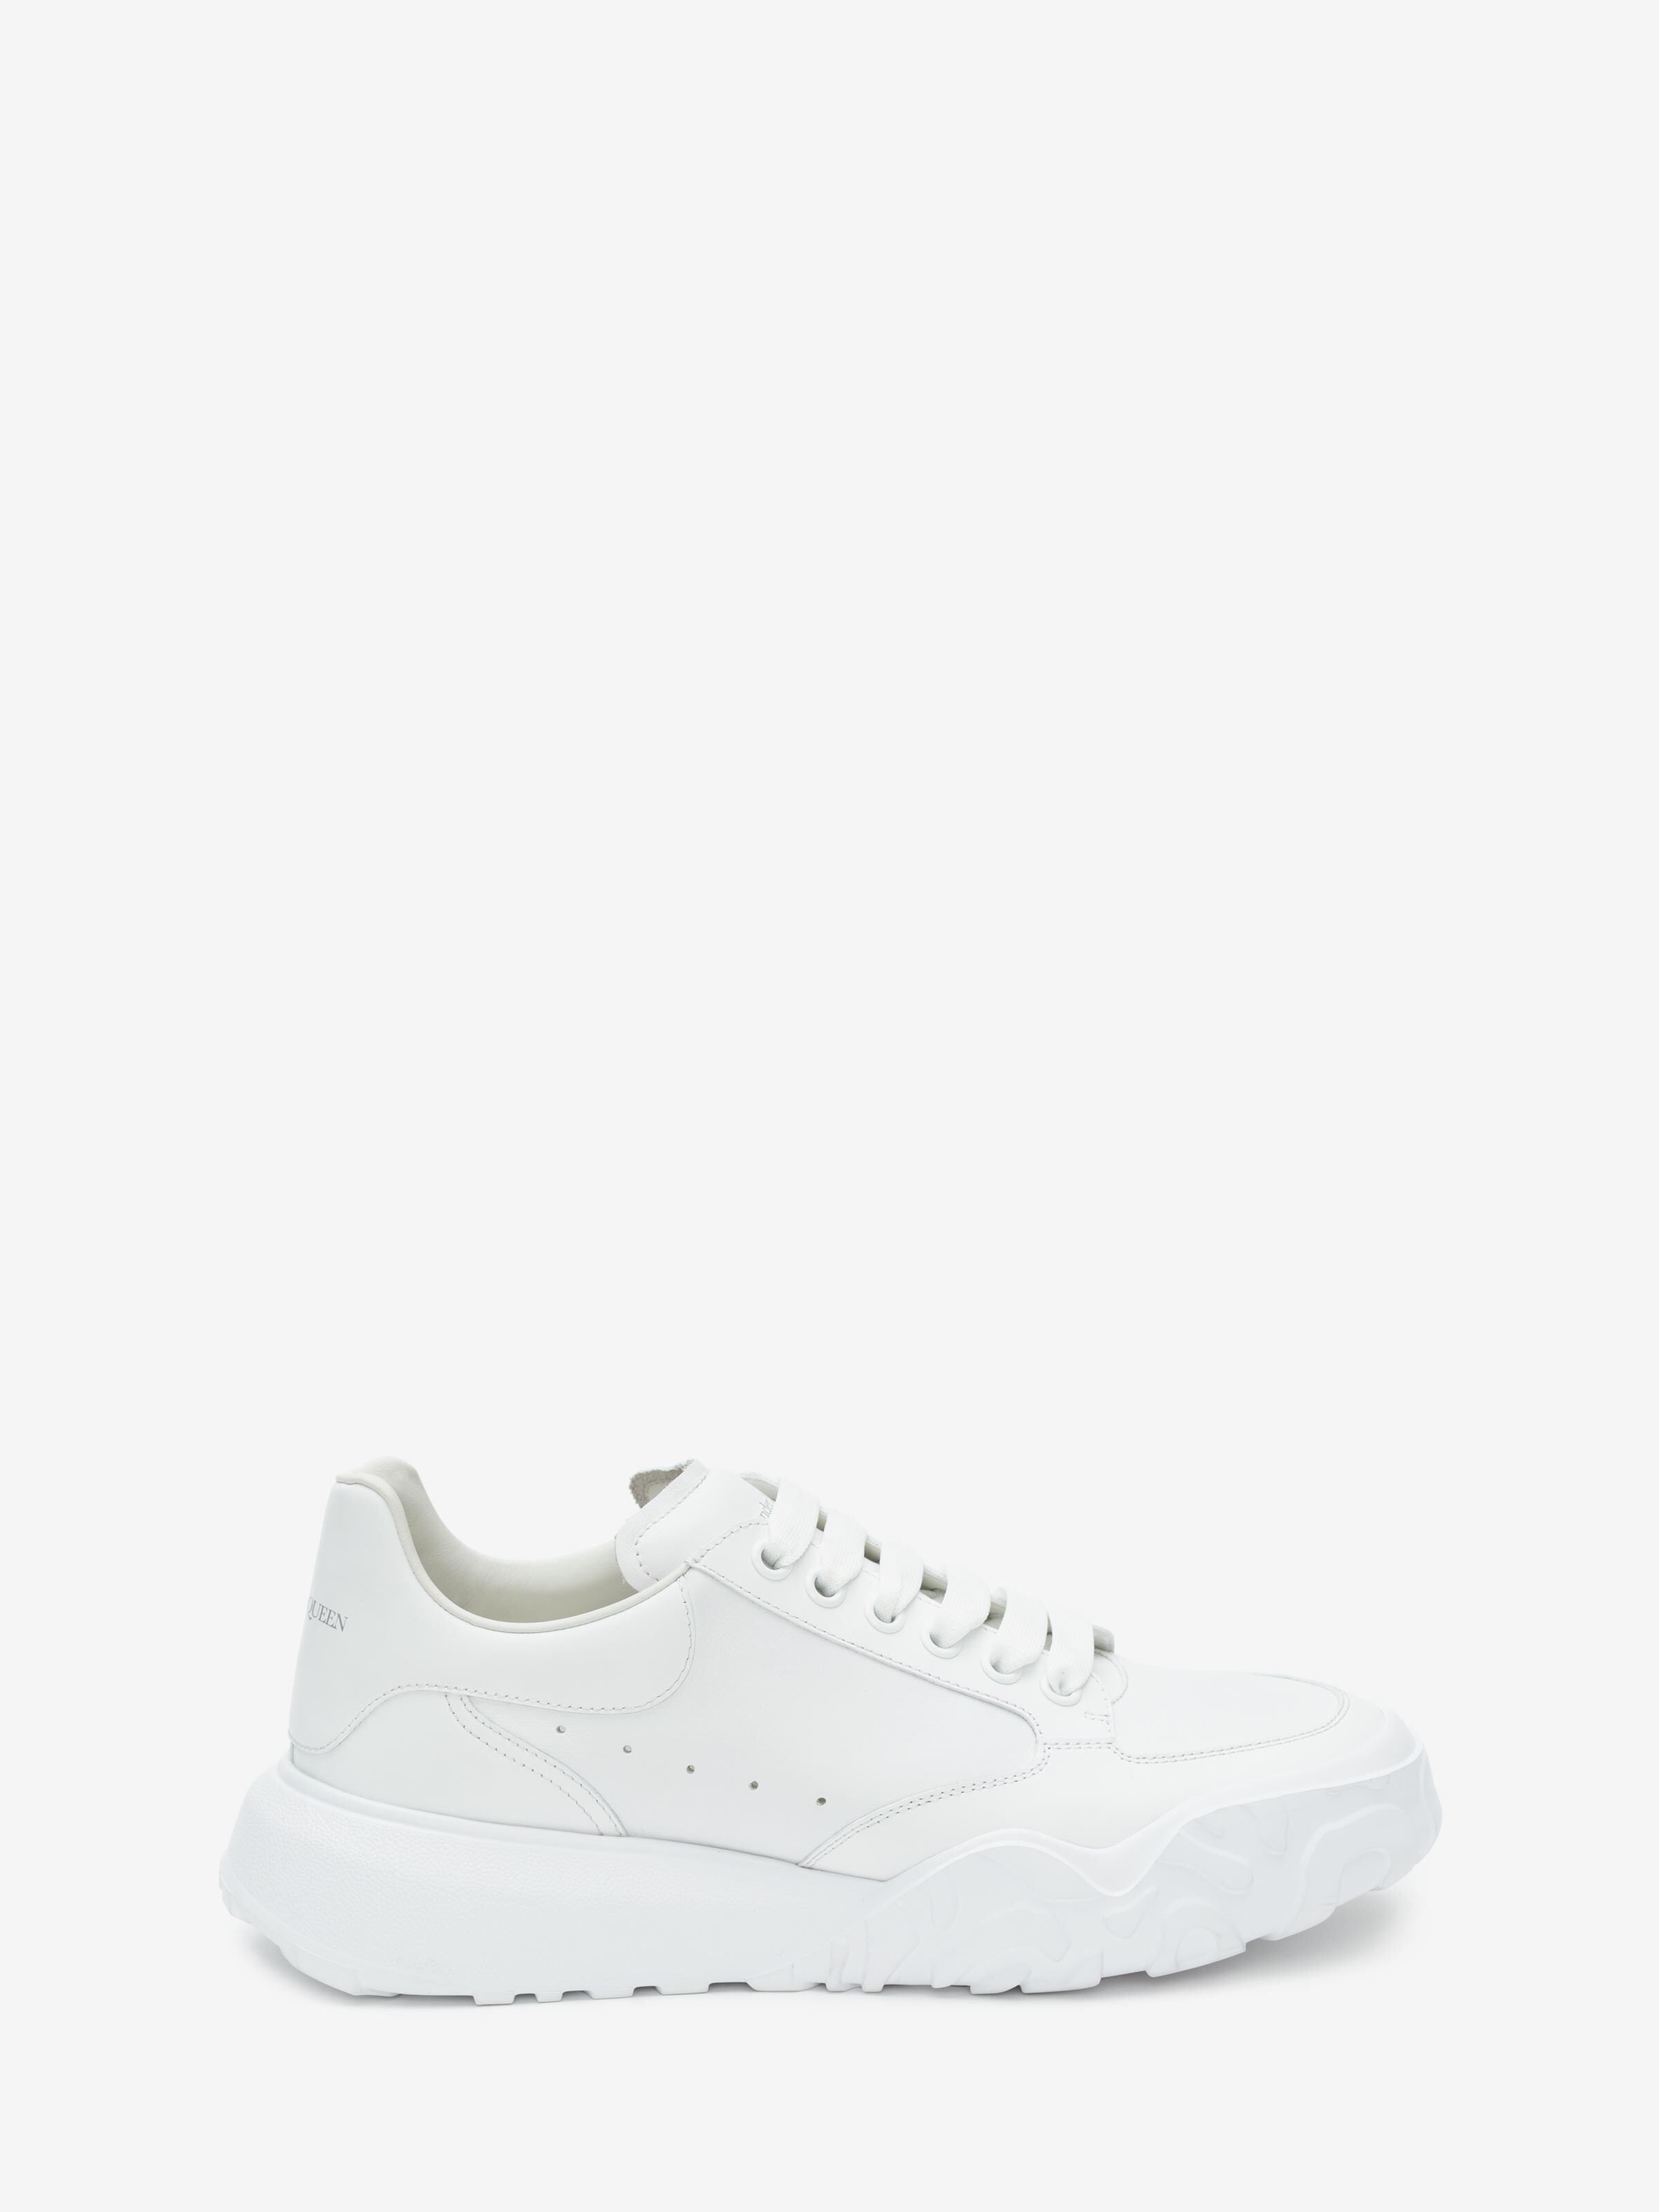 Alexander Mcqueen Outlet: New Court leather sneakers - White  Alexander Mcqueen  sneakers 634619WIA99 online at